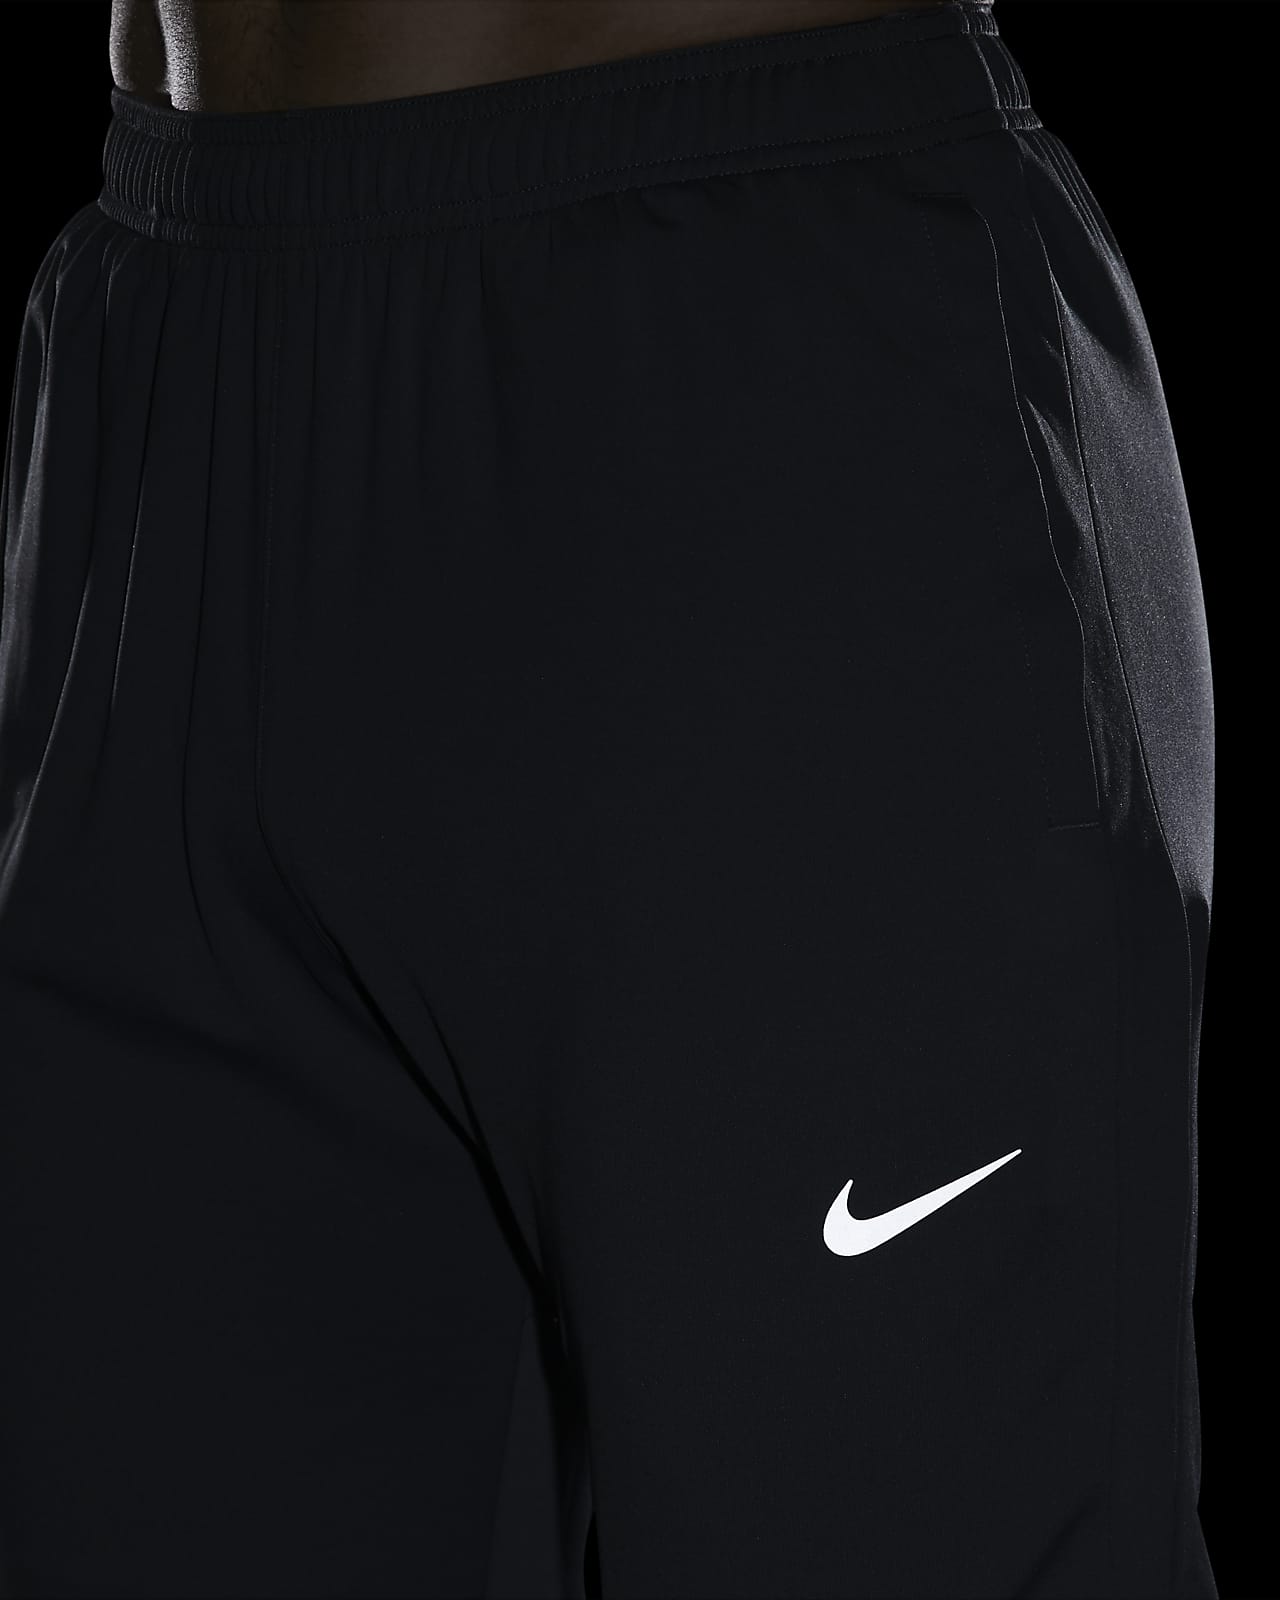 Nike Challenger Men's Dri-FIT Running Tights. Nike IE